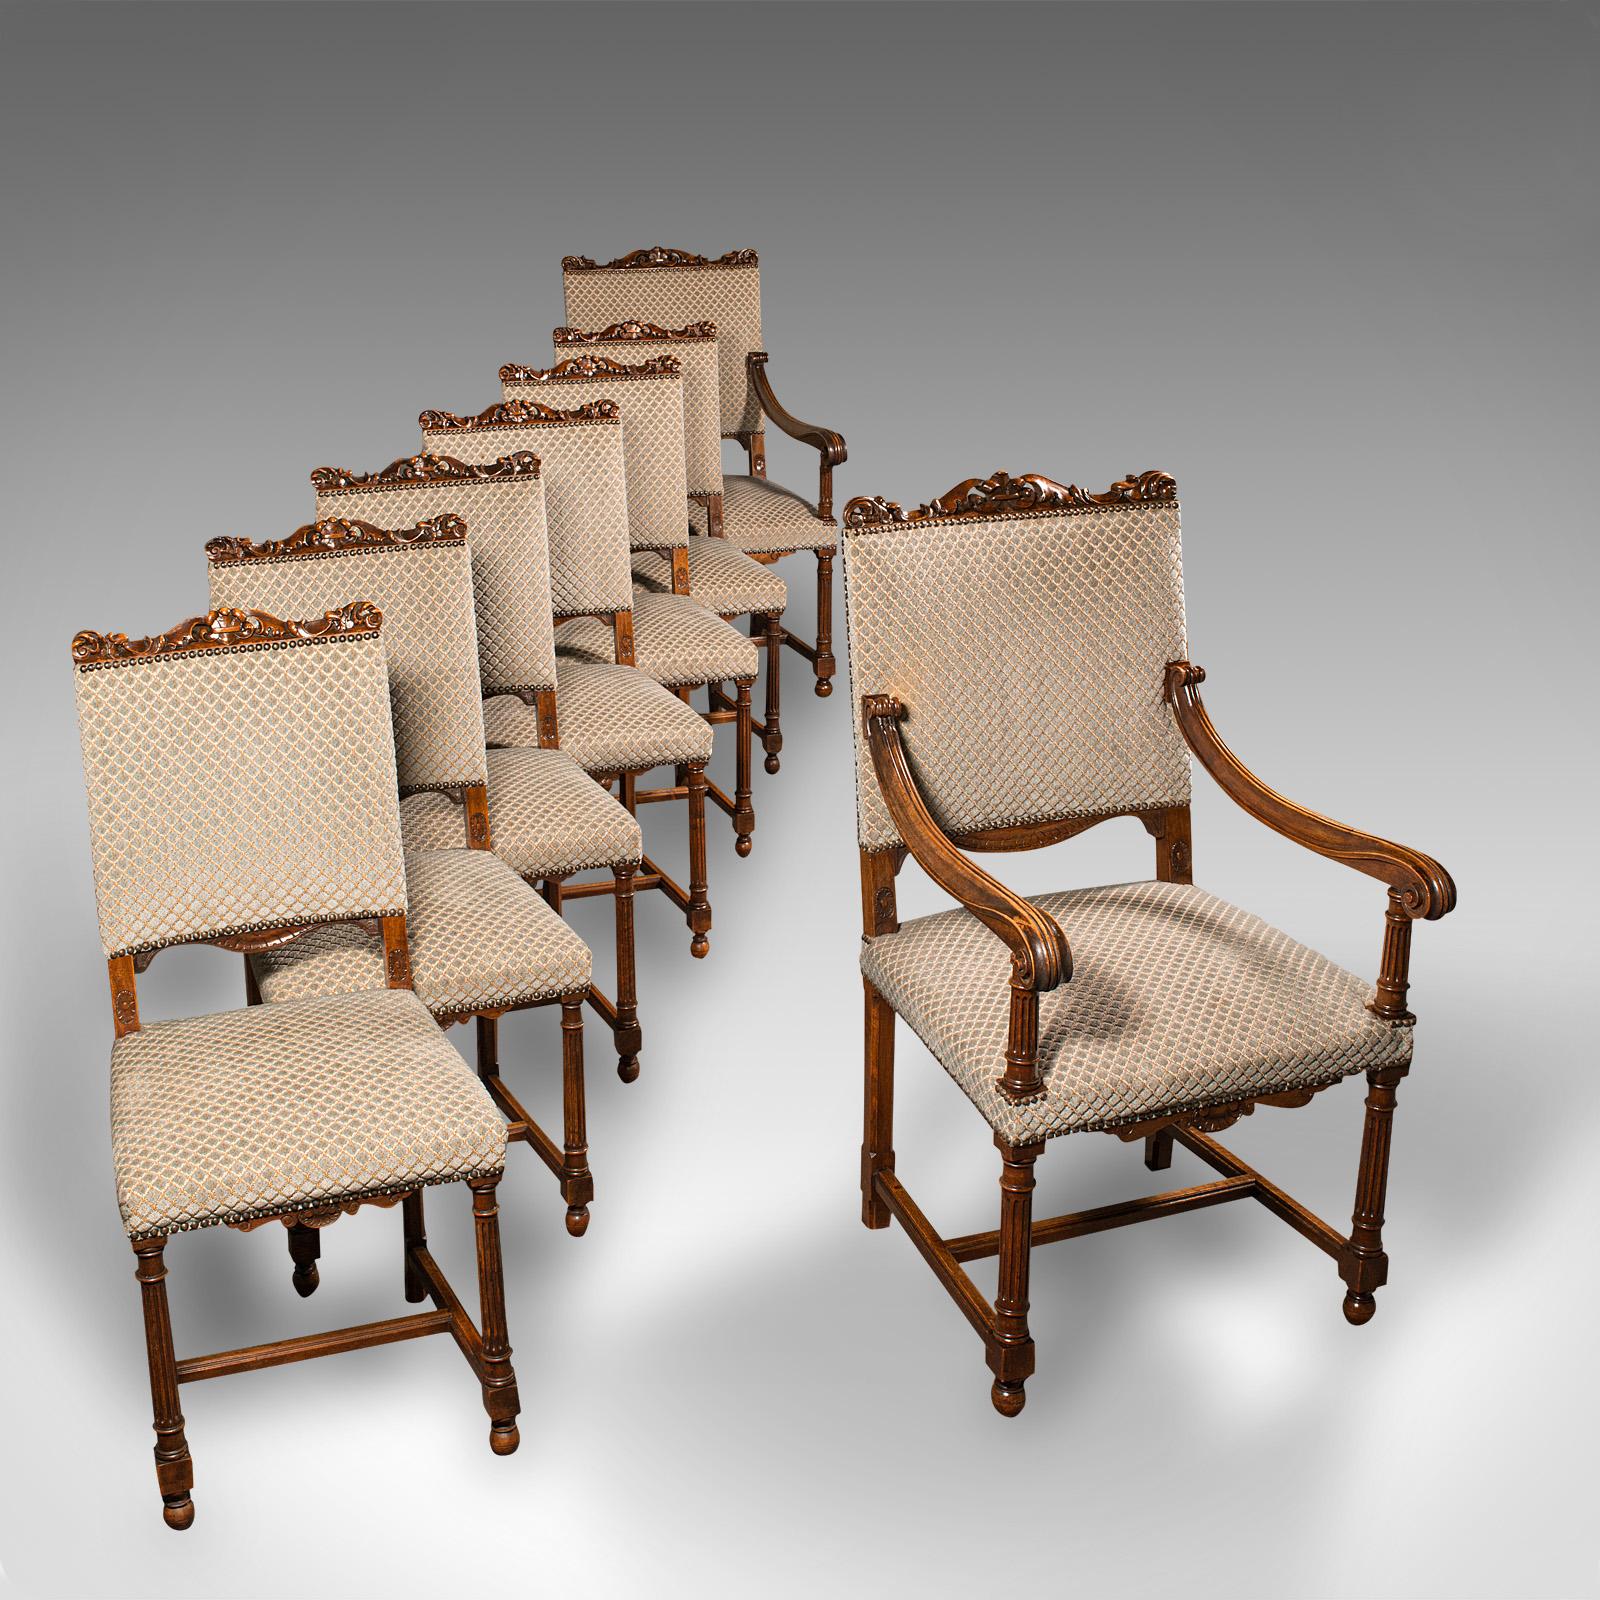 Set of 8 Antique Dining Chairs, English, Walnut, Carver, Seat, Edwardian, c.1910 For Sale 1